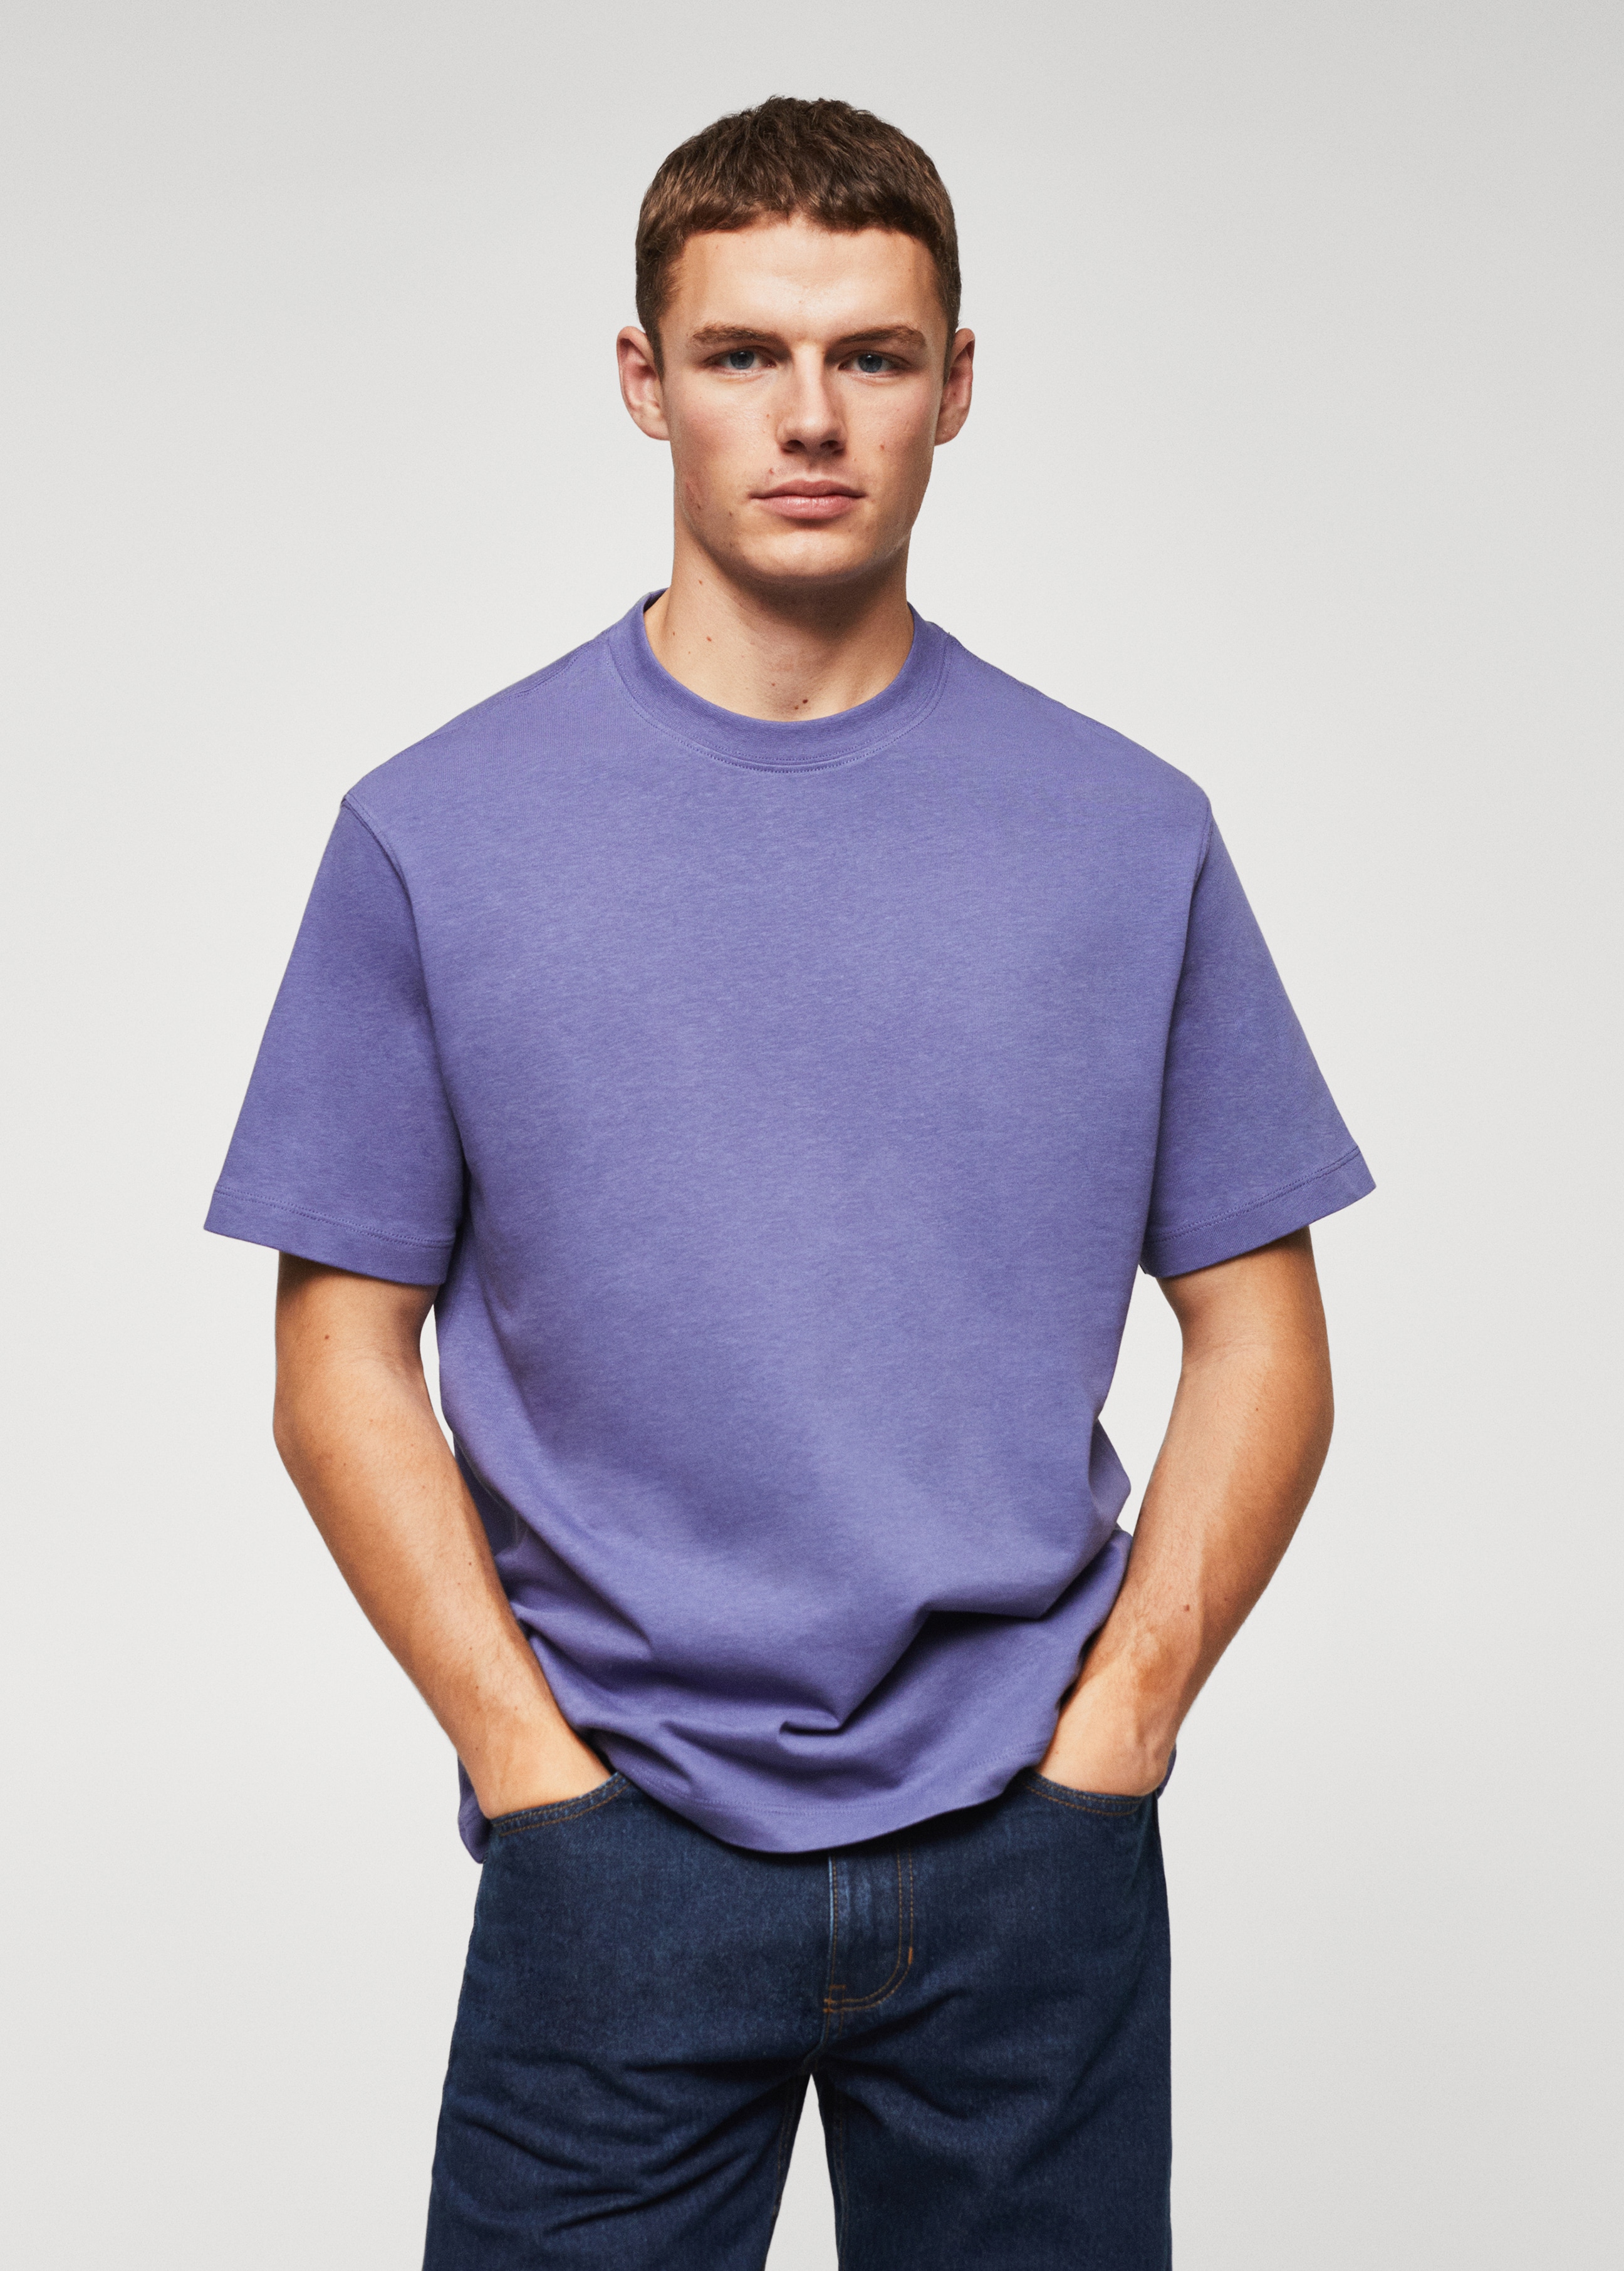 Relaxed fit cotton t-shirt - Medium plane